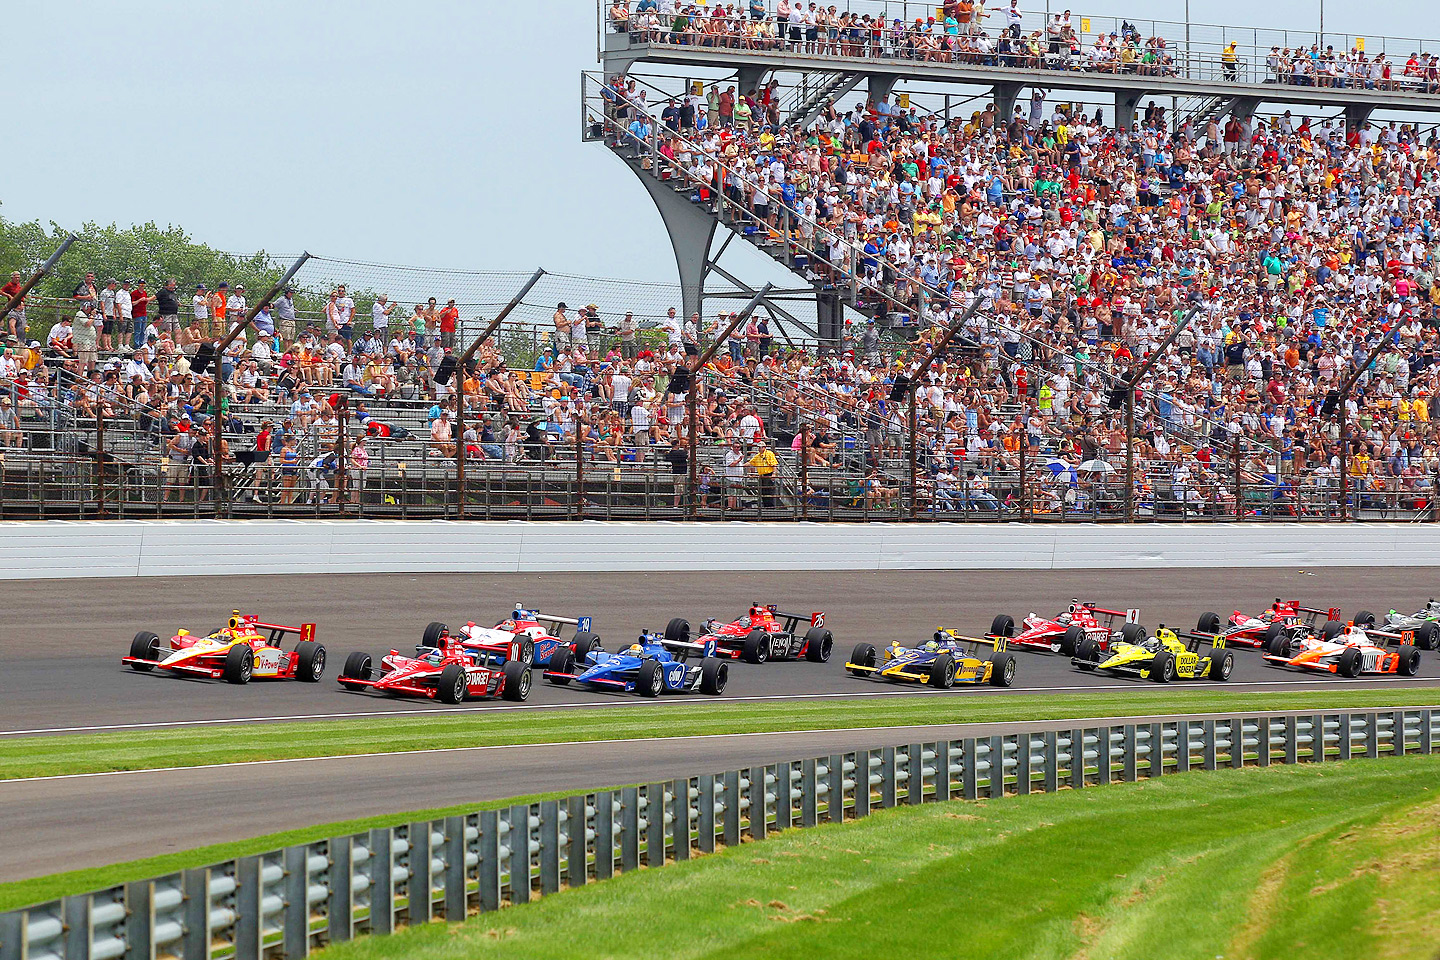 Indianapolis 500 Vacation Rentals - Places to Stay Near the.